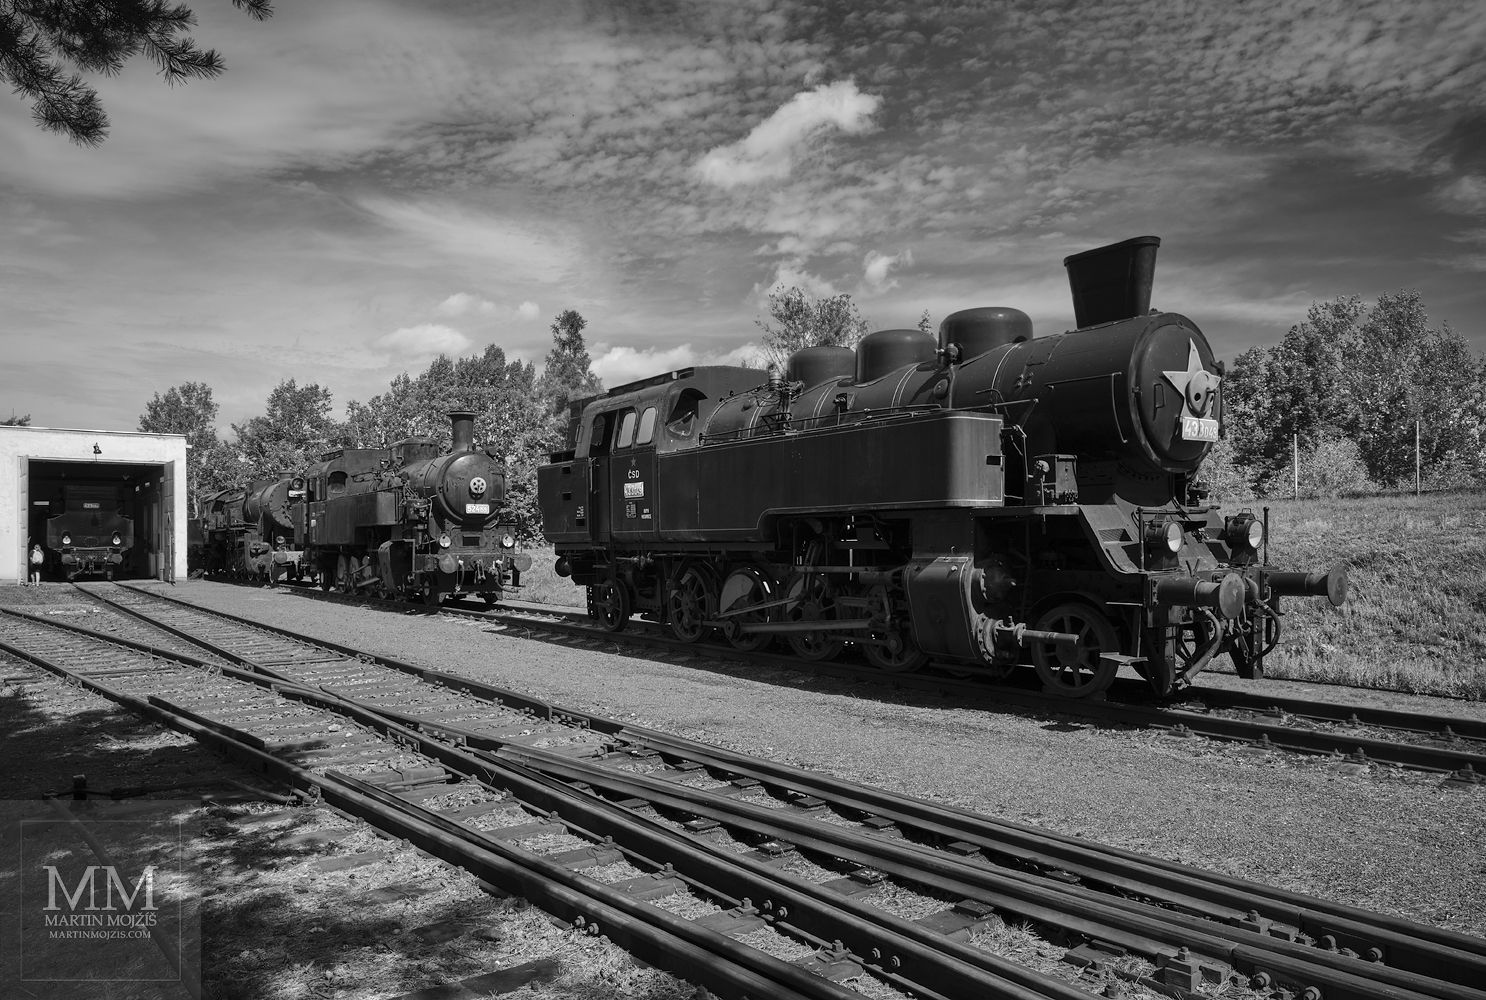 Steam locomotives on the tracks in the summer afternoon. Fine art photograph SERENITY OF THE SUMMER AFTERNOON I., photographed by Martin Mojzis.